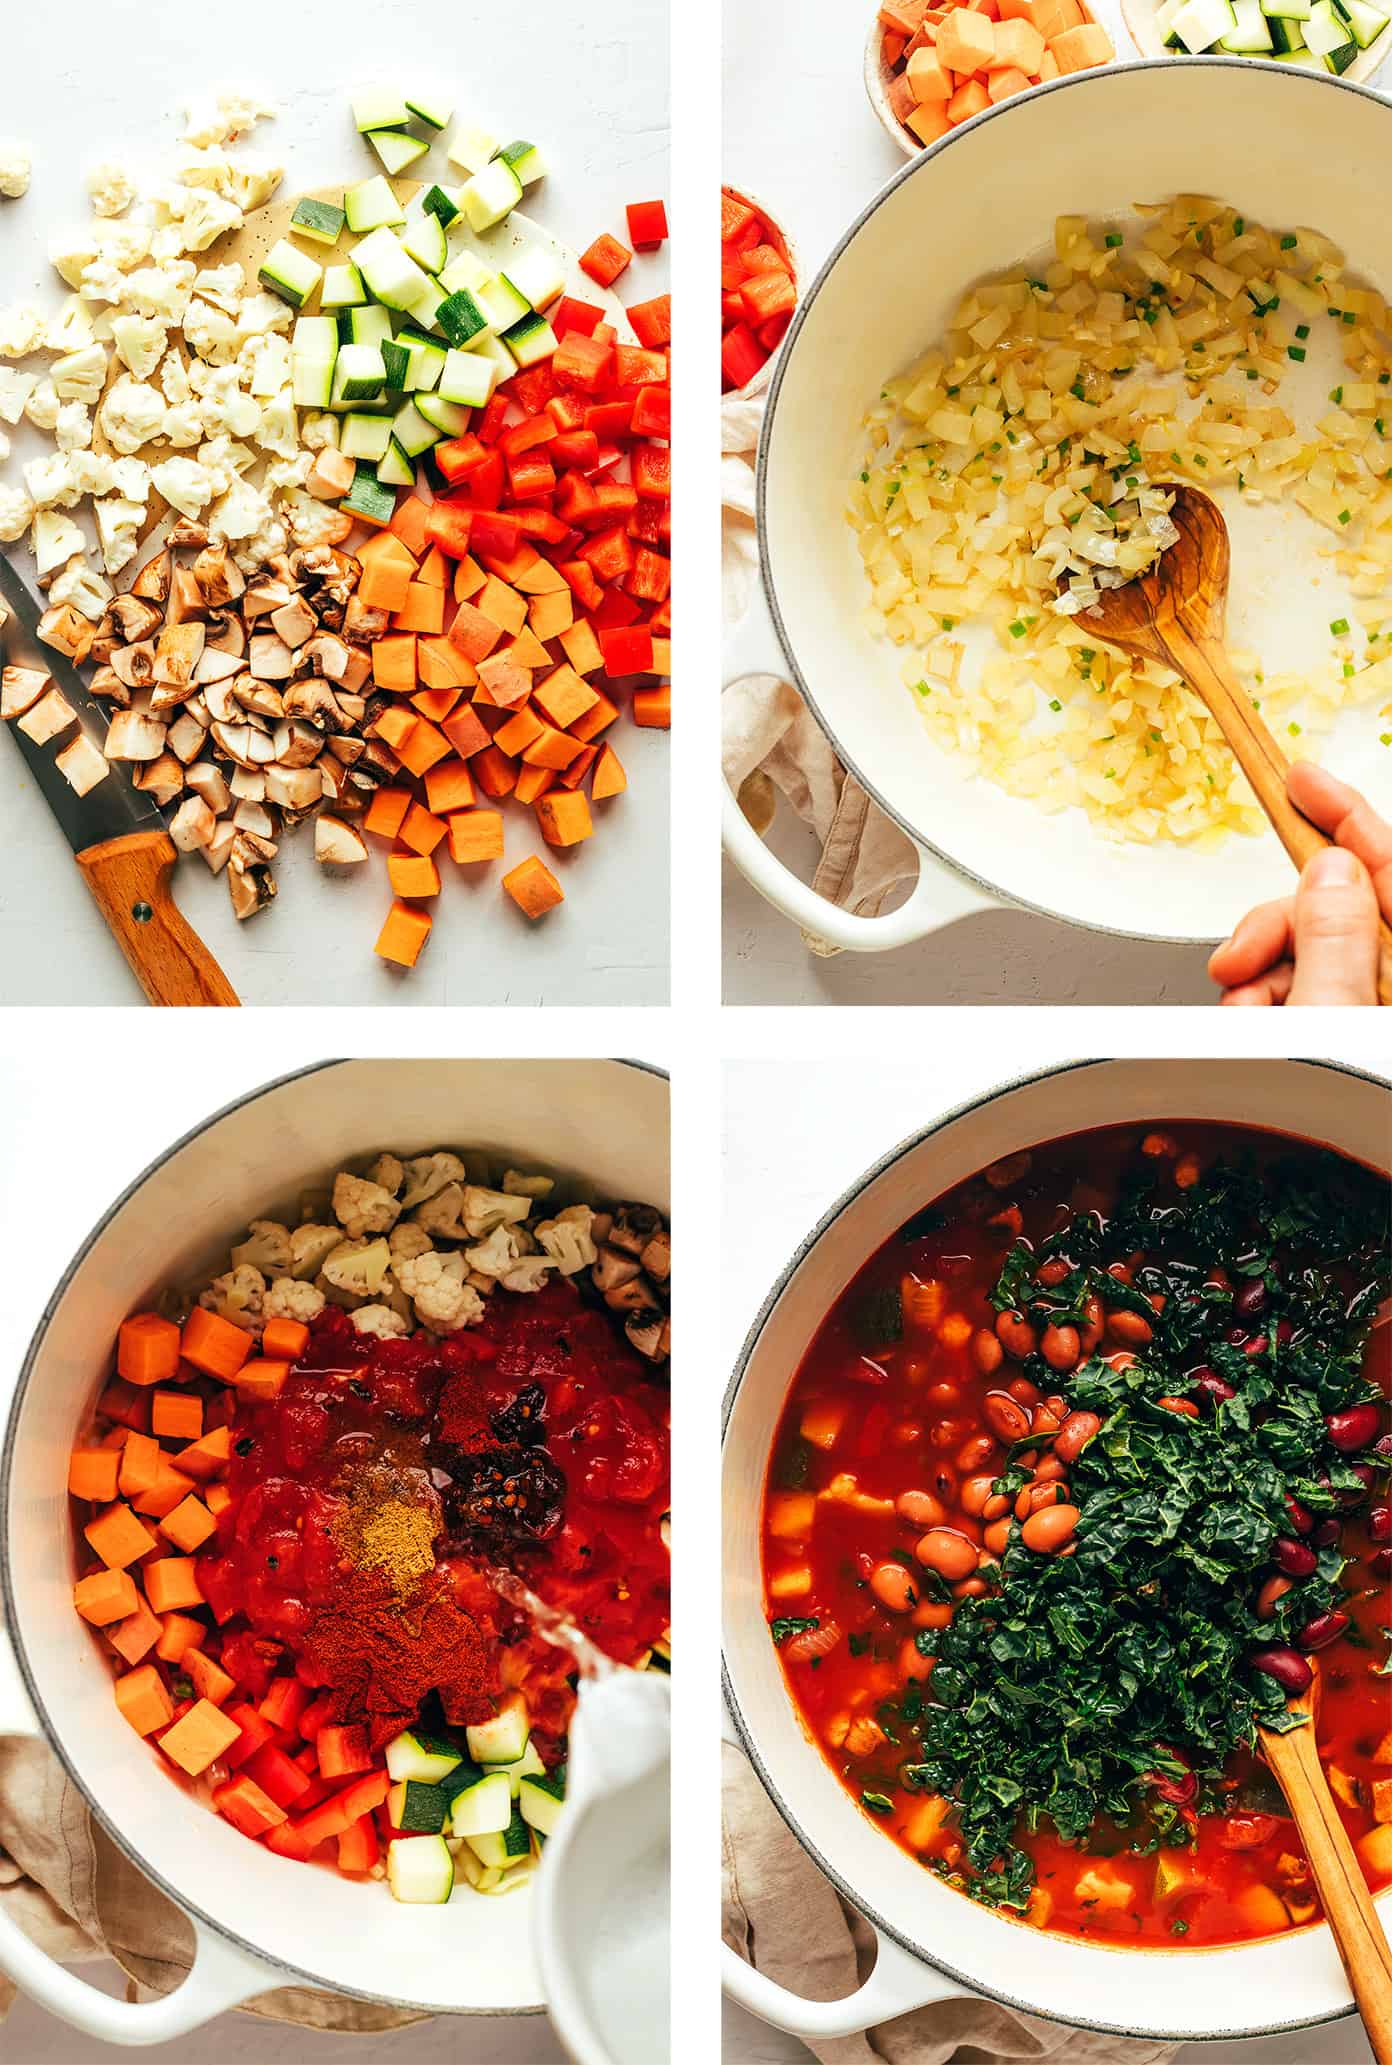 Step by step photos showing how to make vegetarian chili